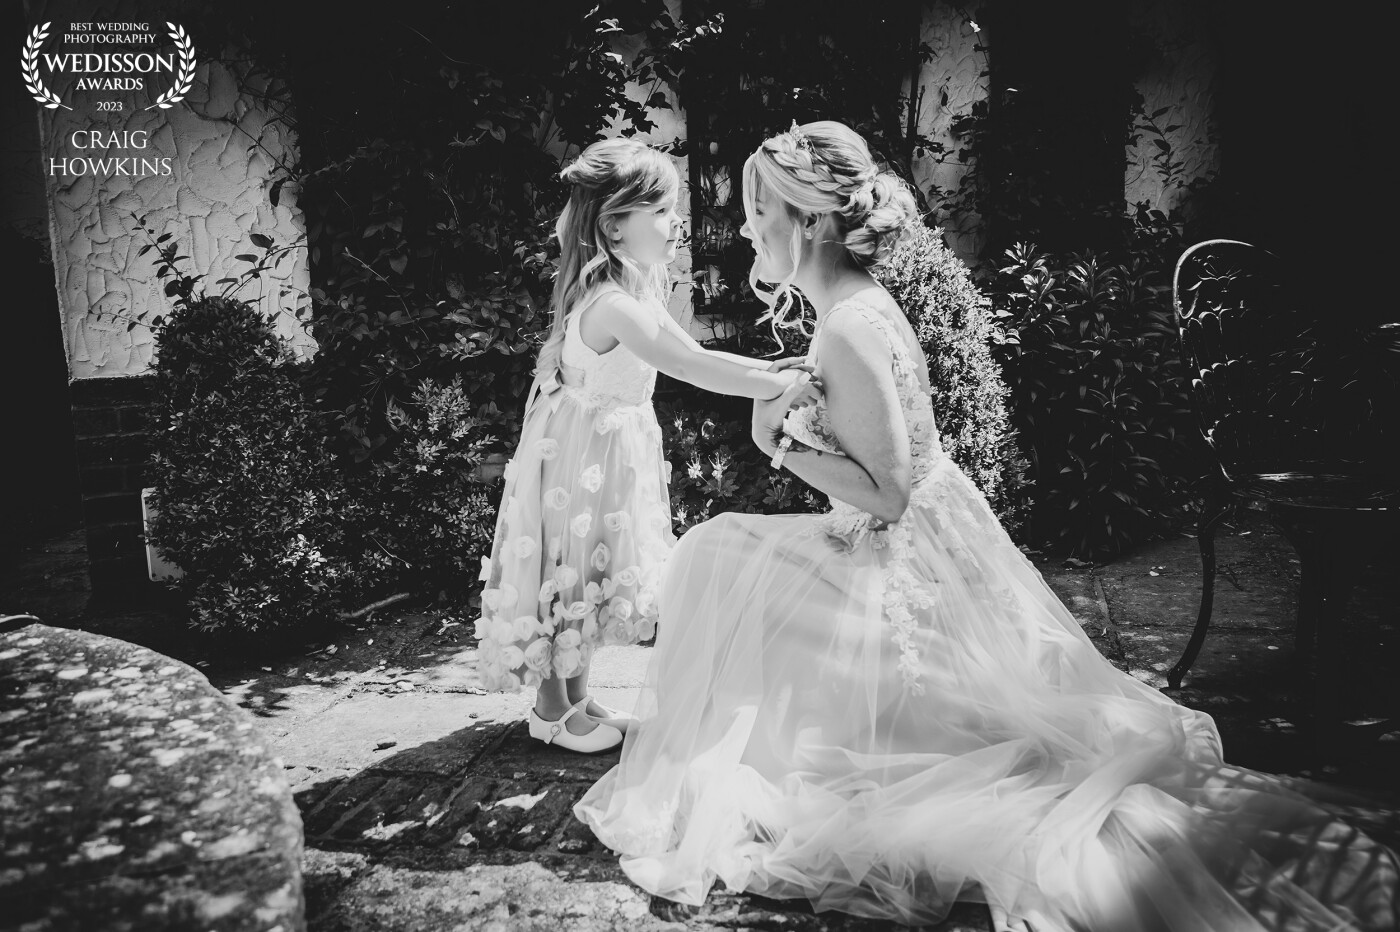 “A mother's treasure is her daughter.” I f you're a  wedding photographer that has capture that moment at the right time. You have captured a true moment in time.